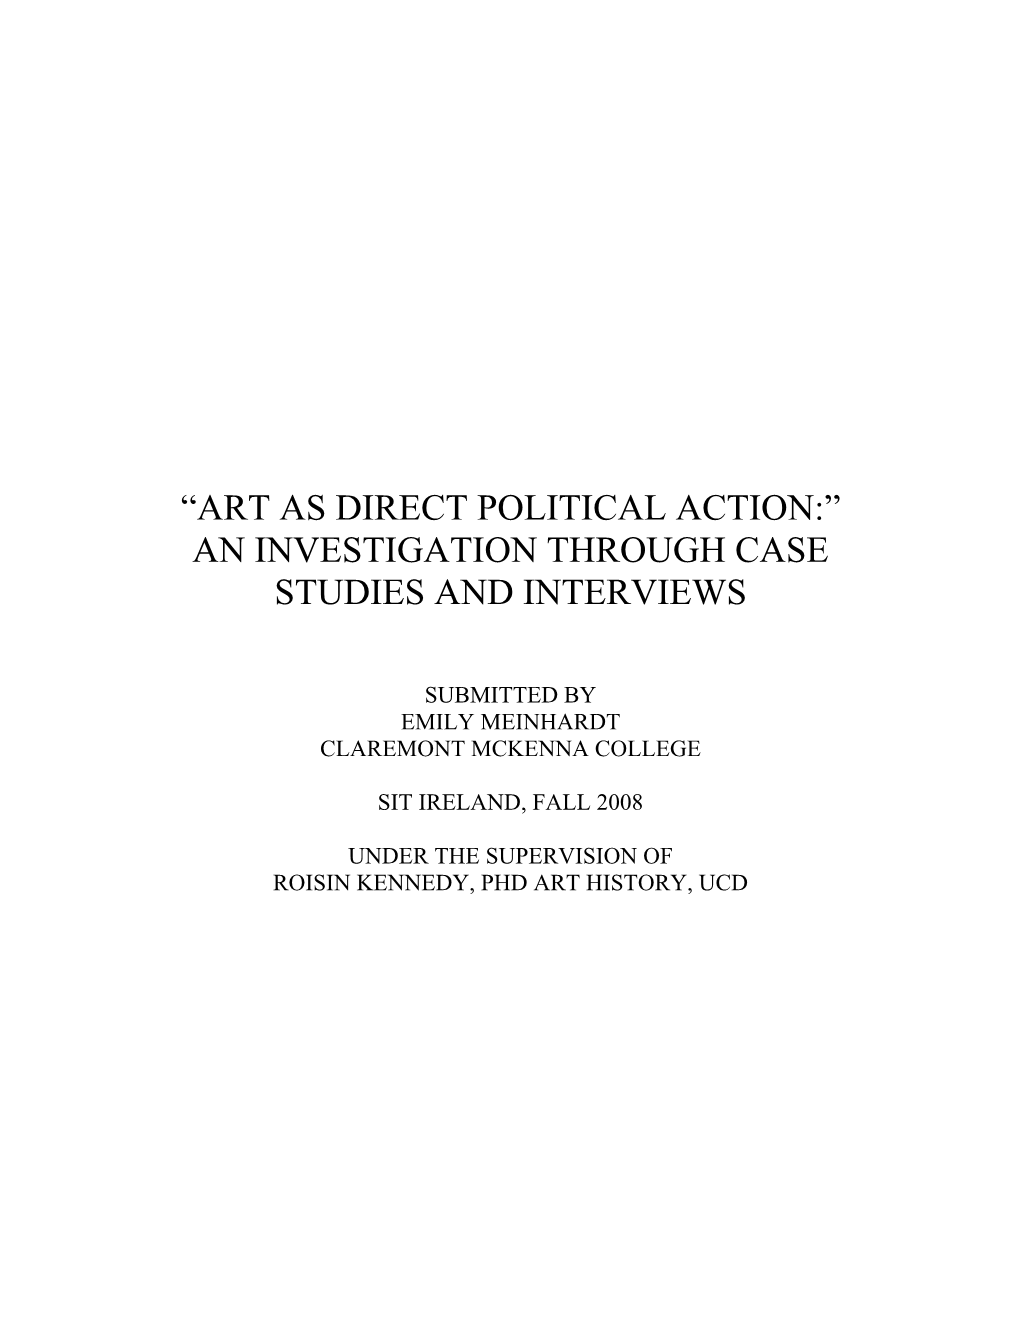 Art As Direct Political Action:” an Investigation Through Case Studies and Interviews